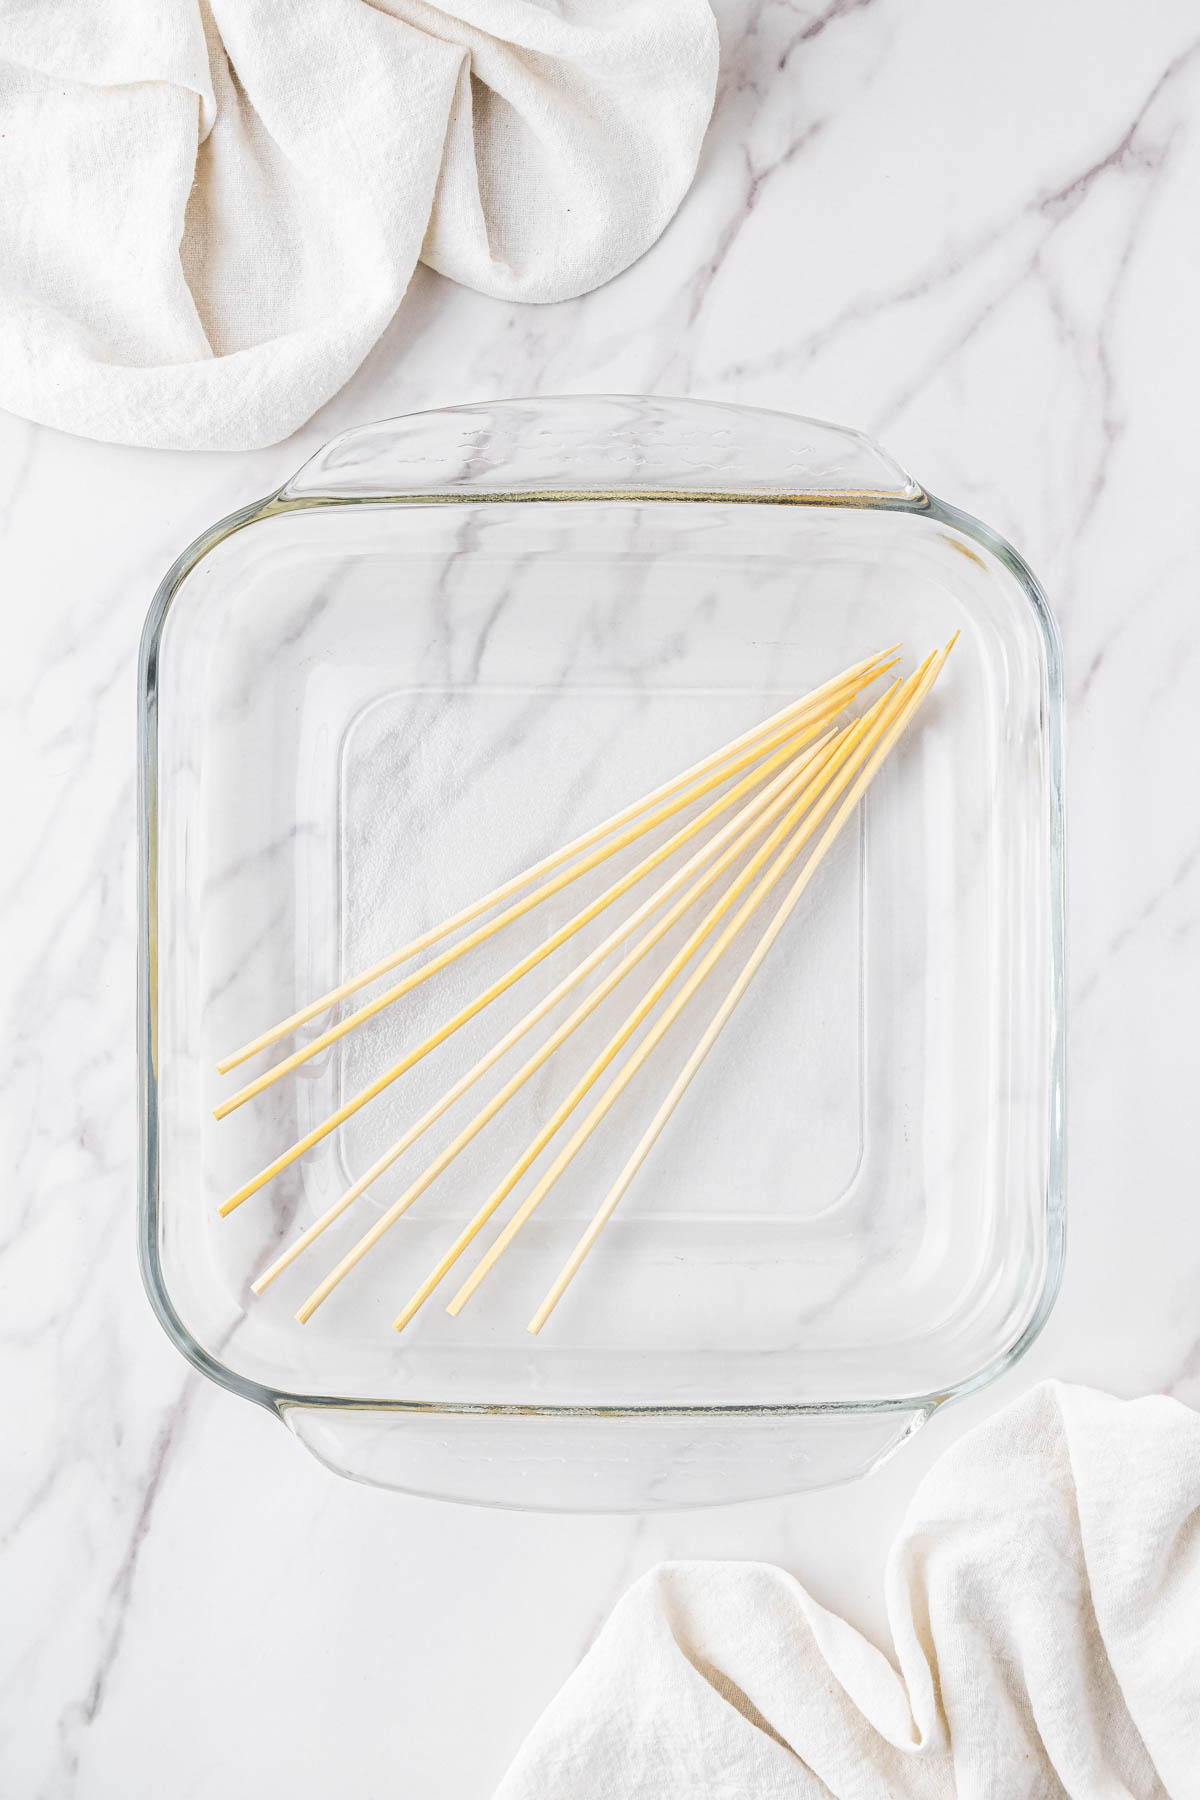 clear dish with wooden sticks